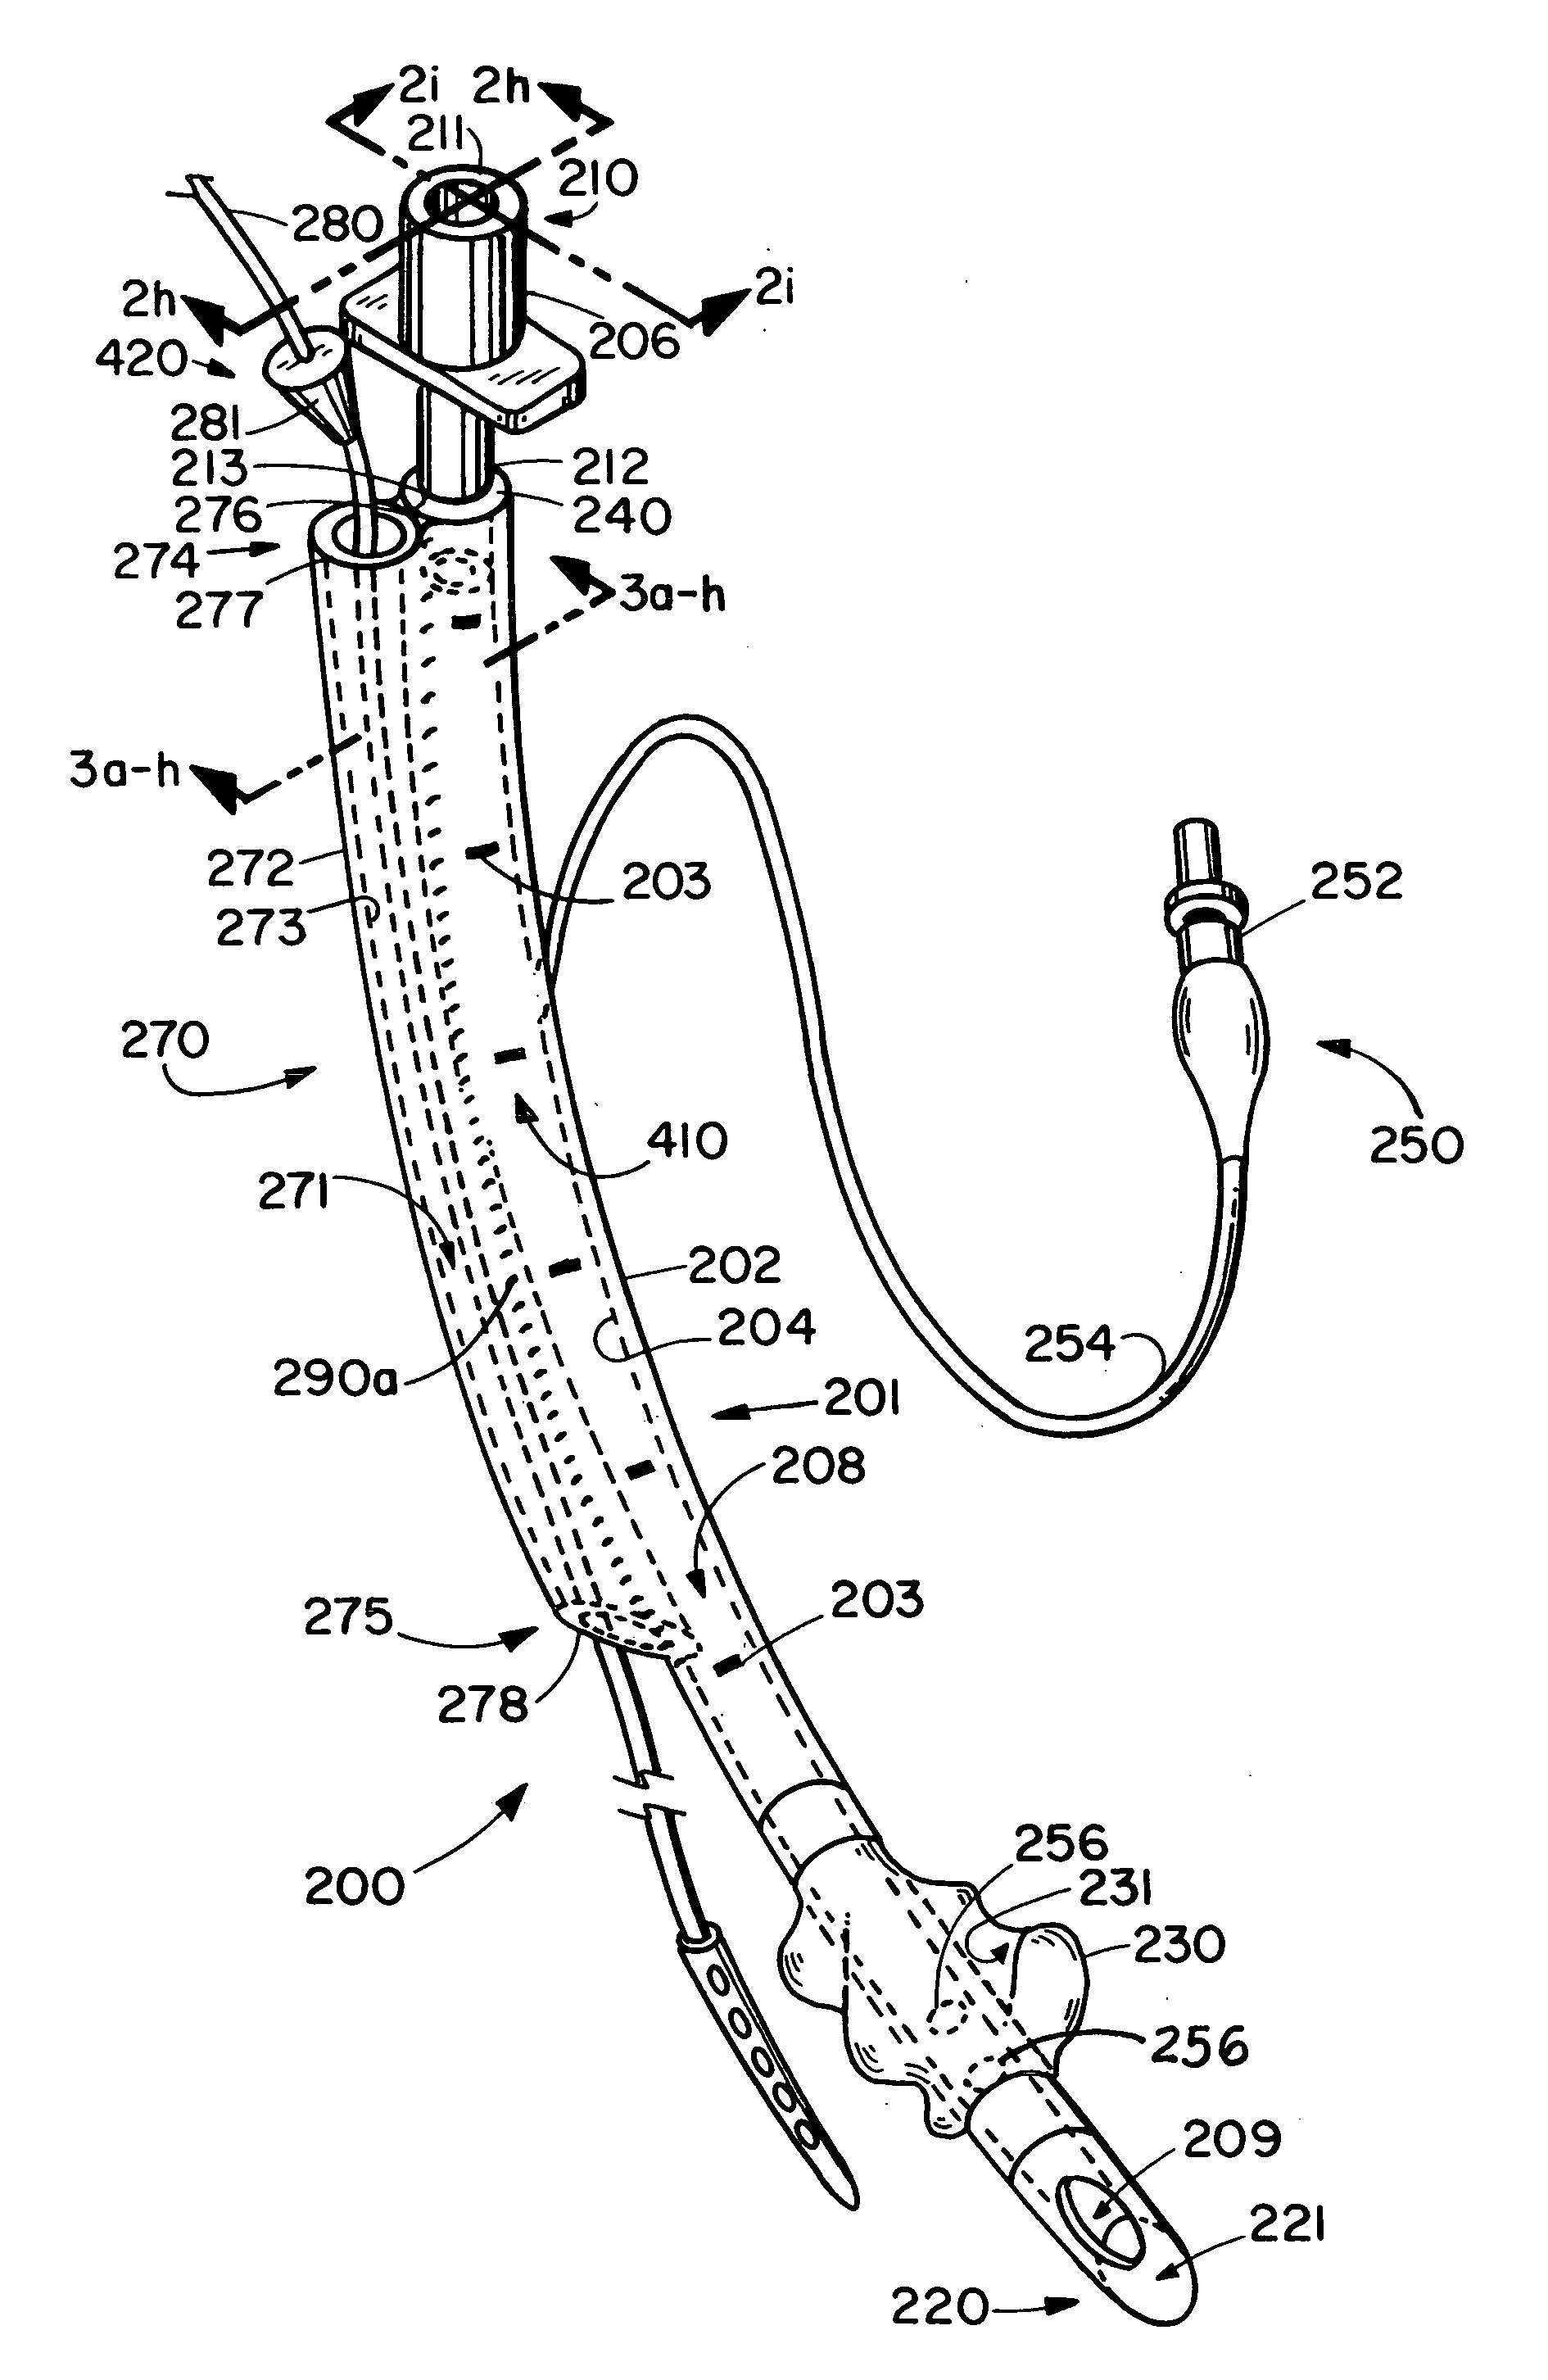 Device and method for placing within a patient an enteral tube after endotracheal intubation